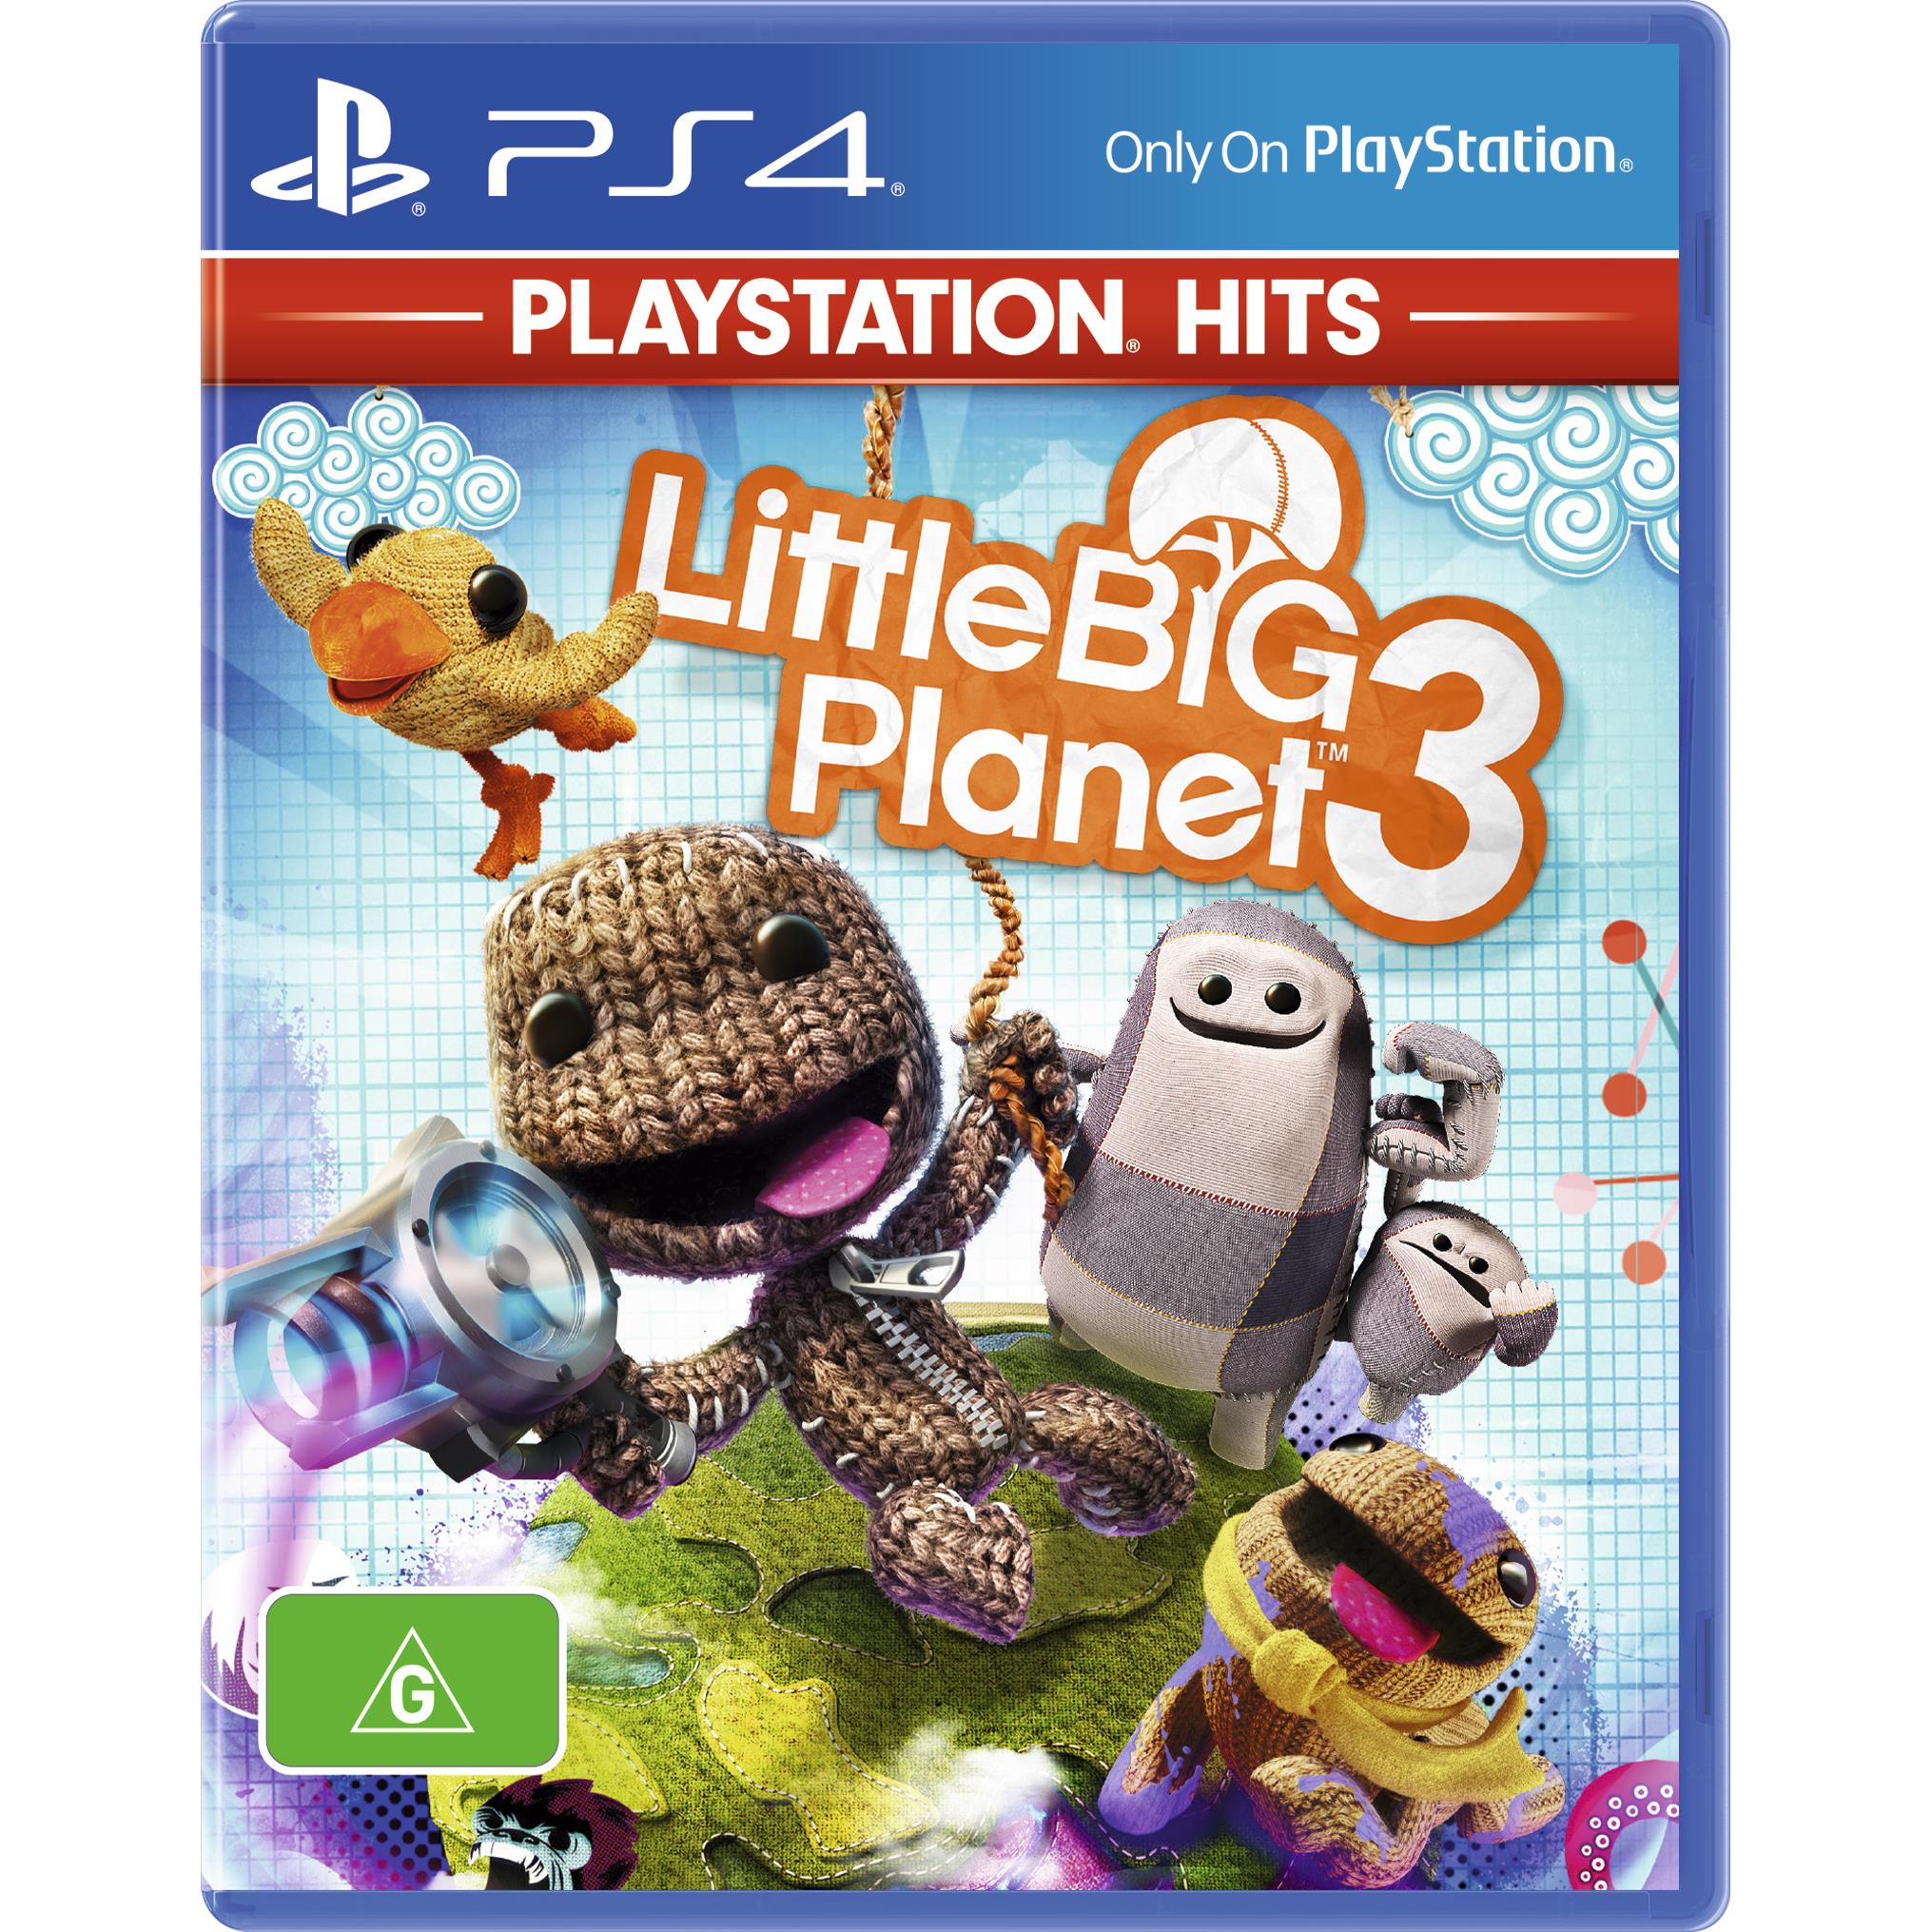 little big planet 3 (playstation hits)